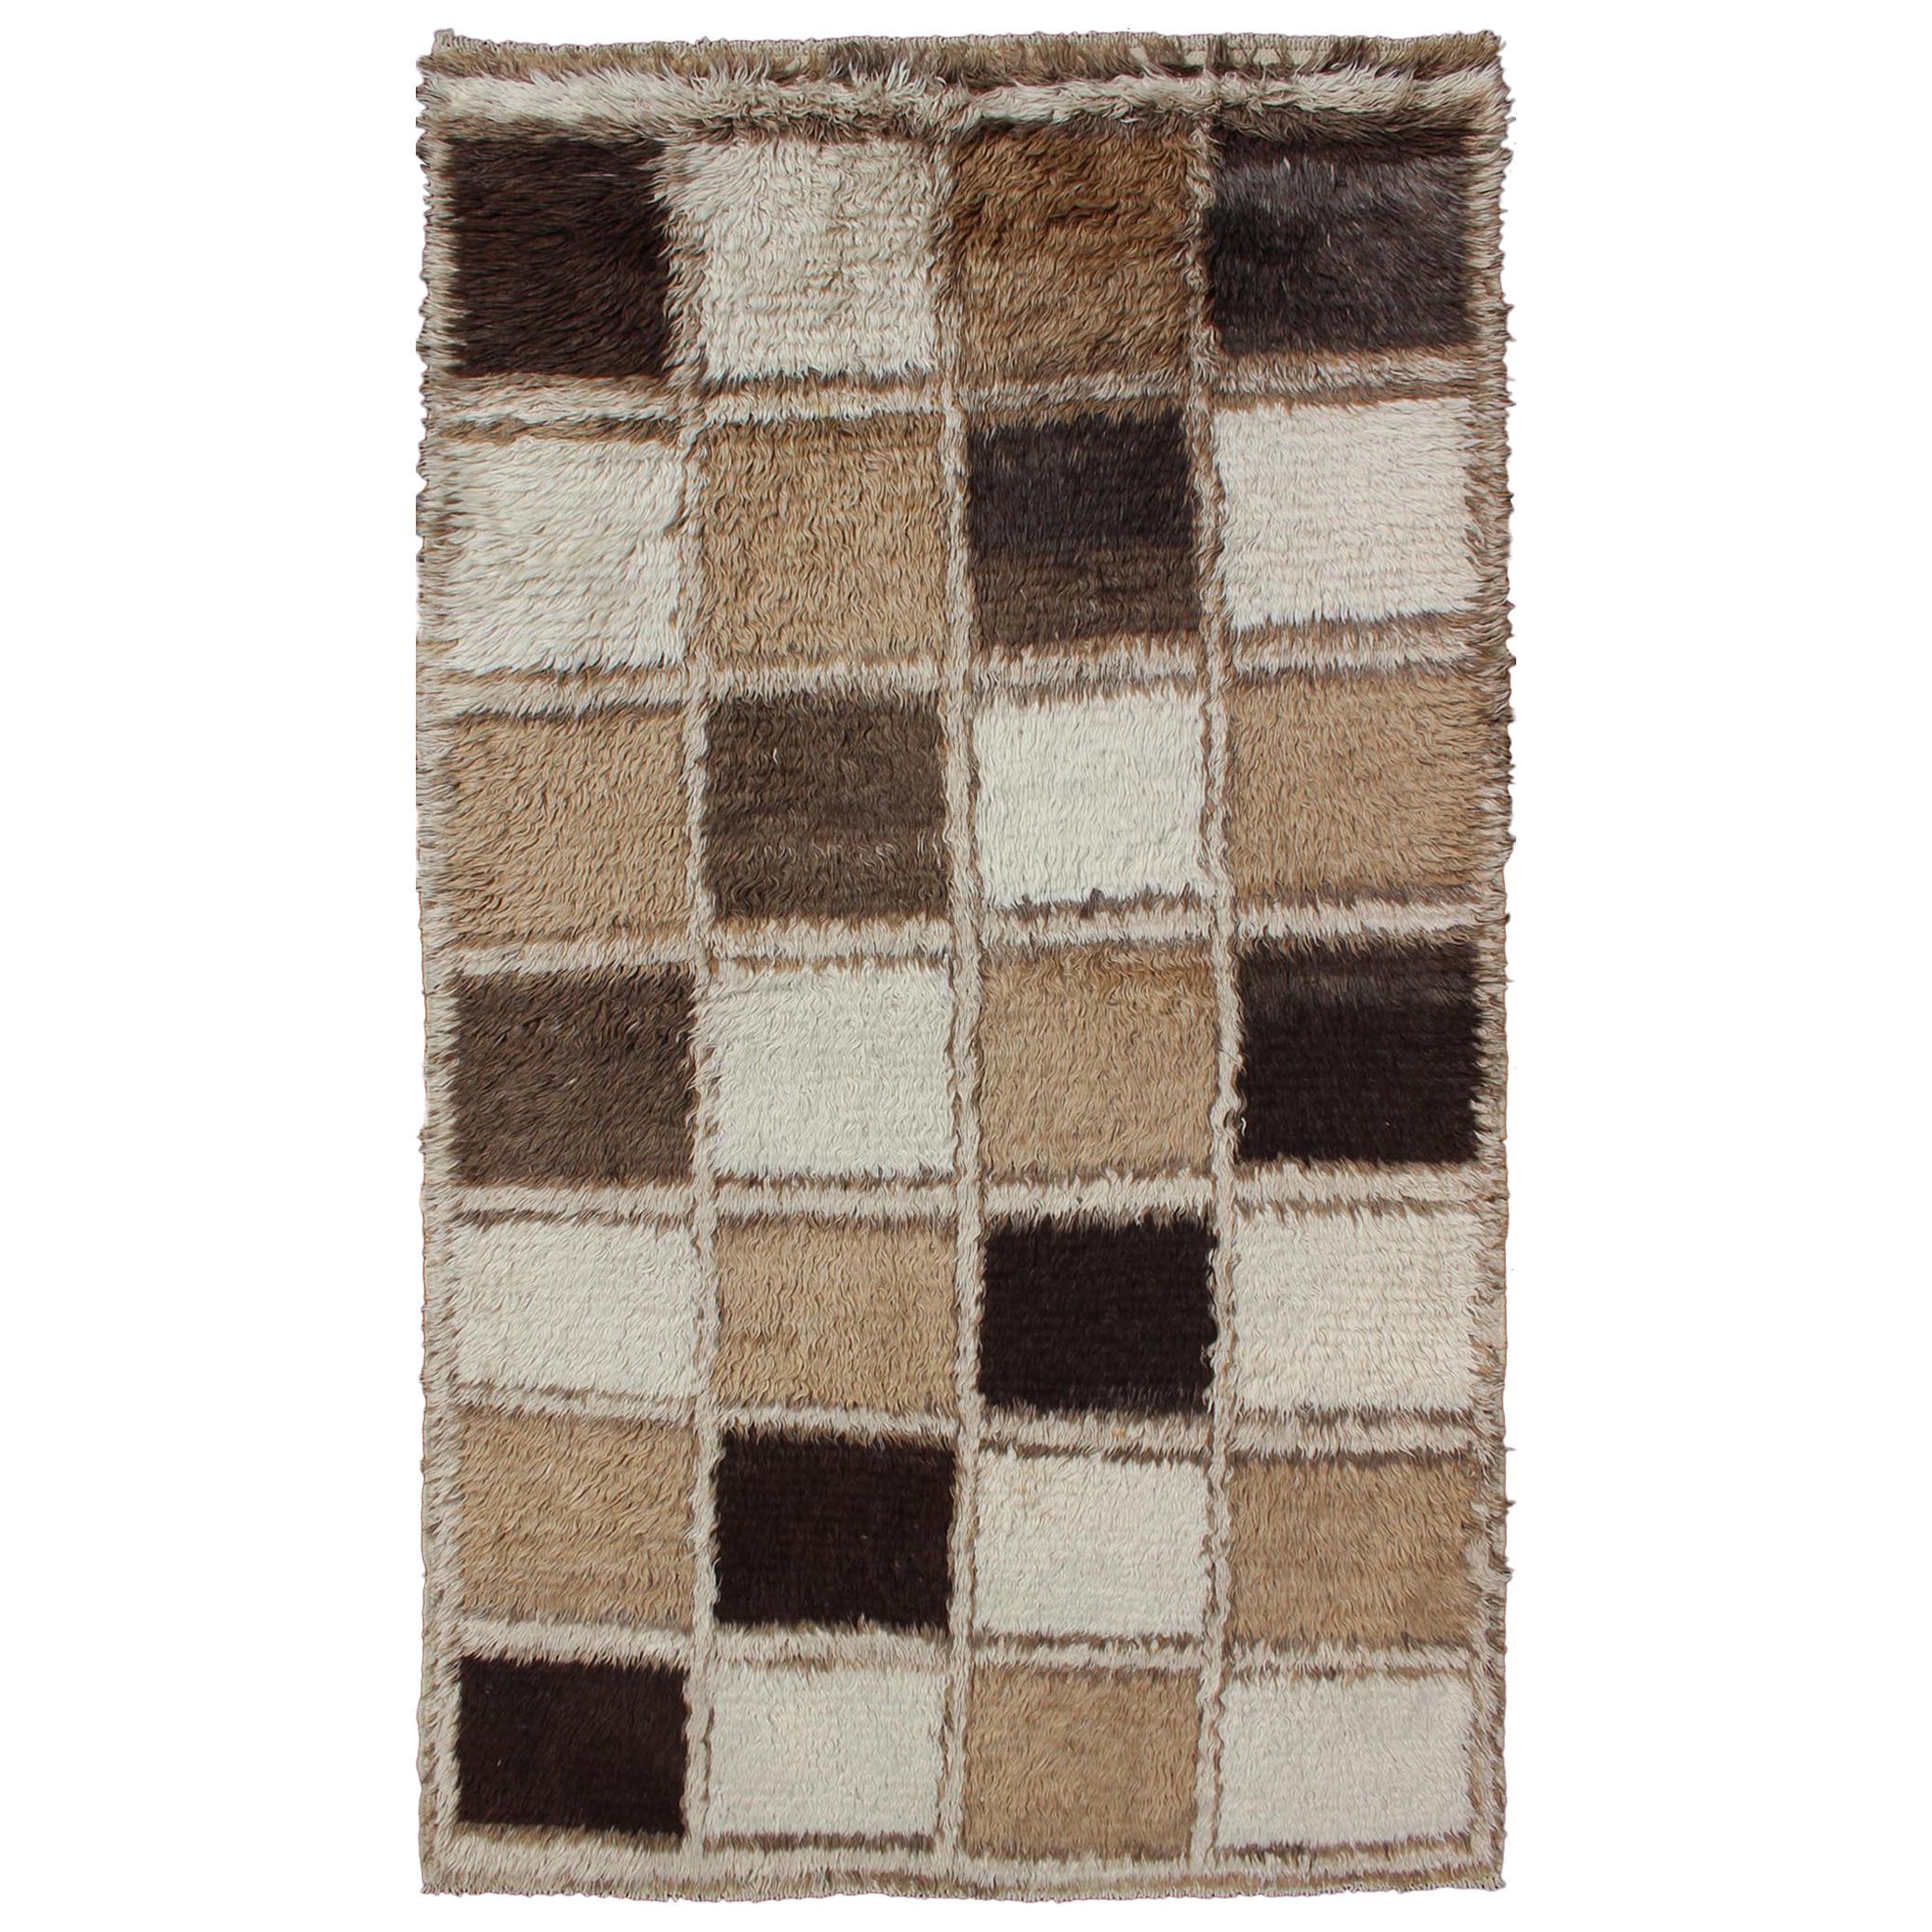 Midcentury Angora Wool Tulu Rug with Checkerboard Design For Sale